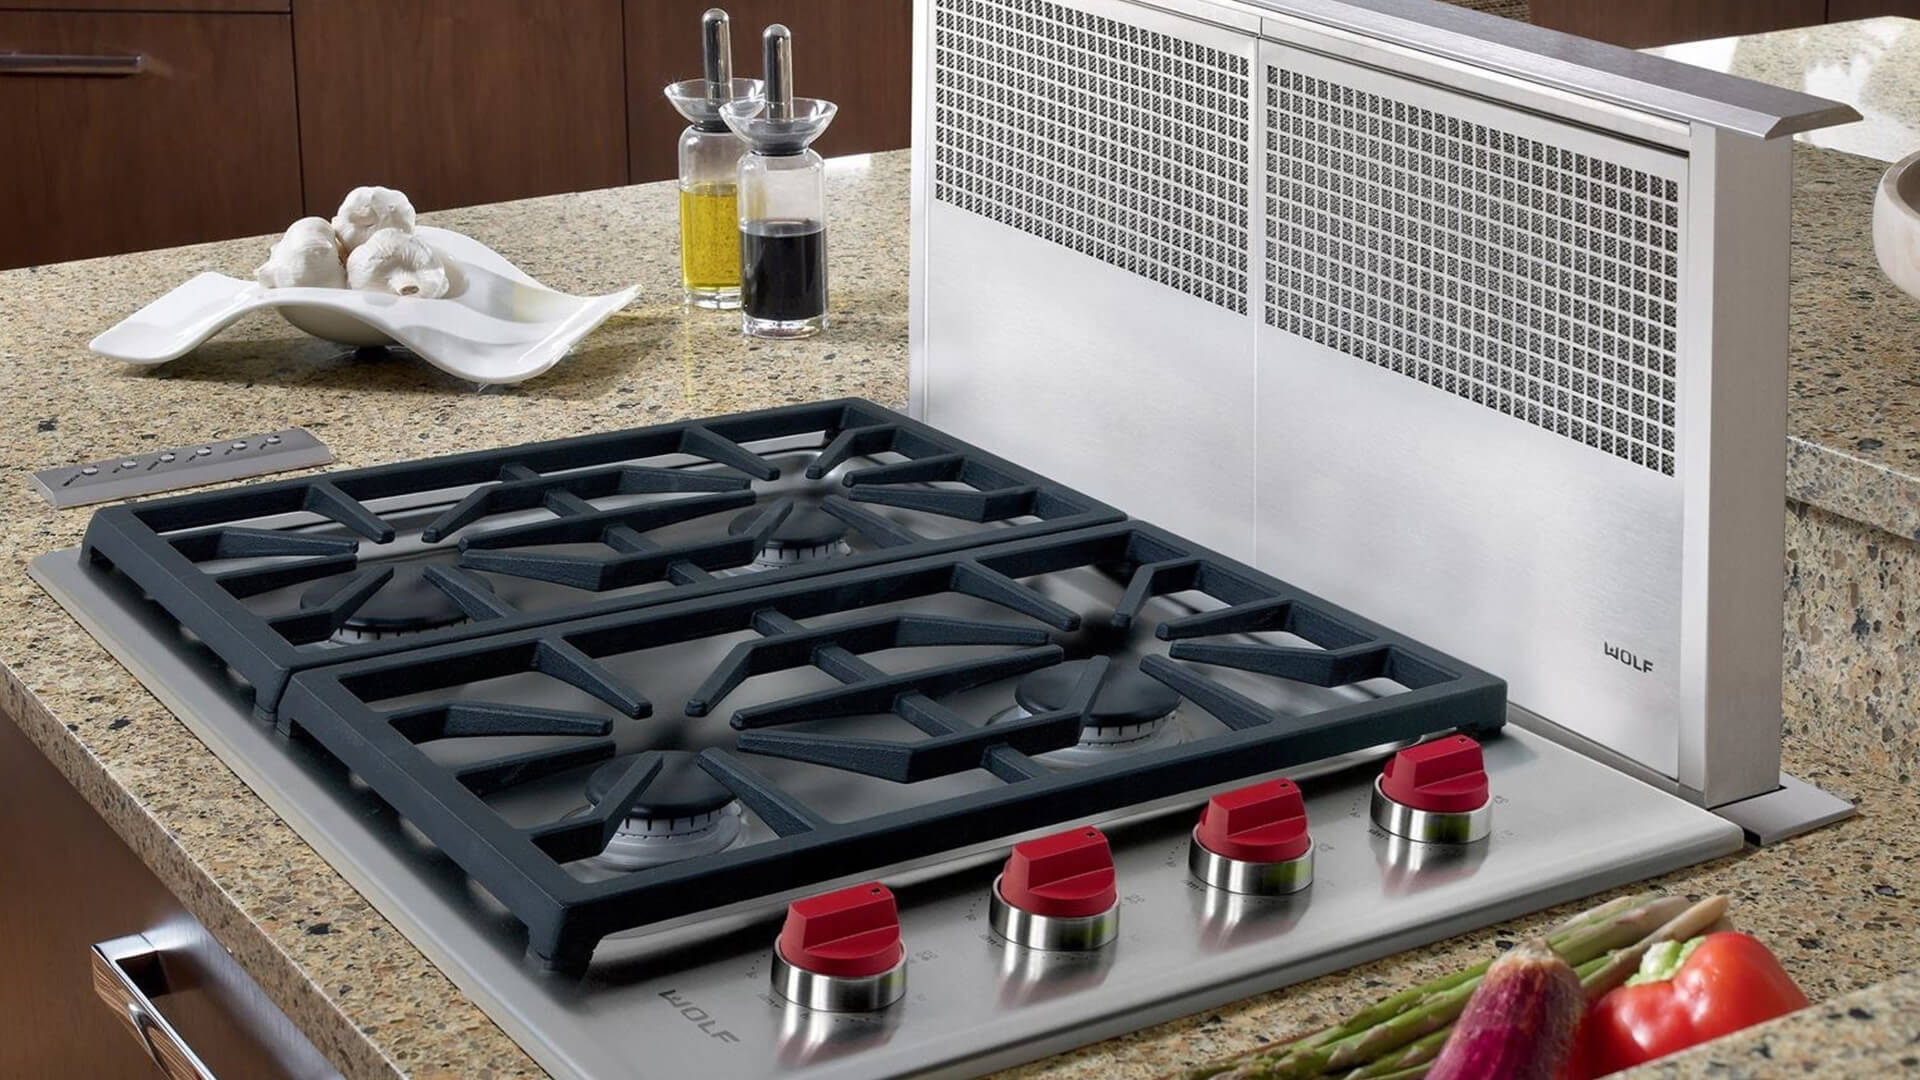 What Are the Common Wolf Cooktop Problems and How To Fix - Wolf Appliance Repair Experts